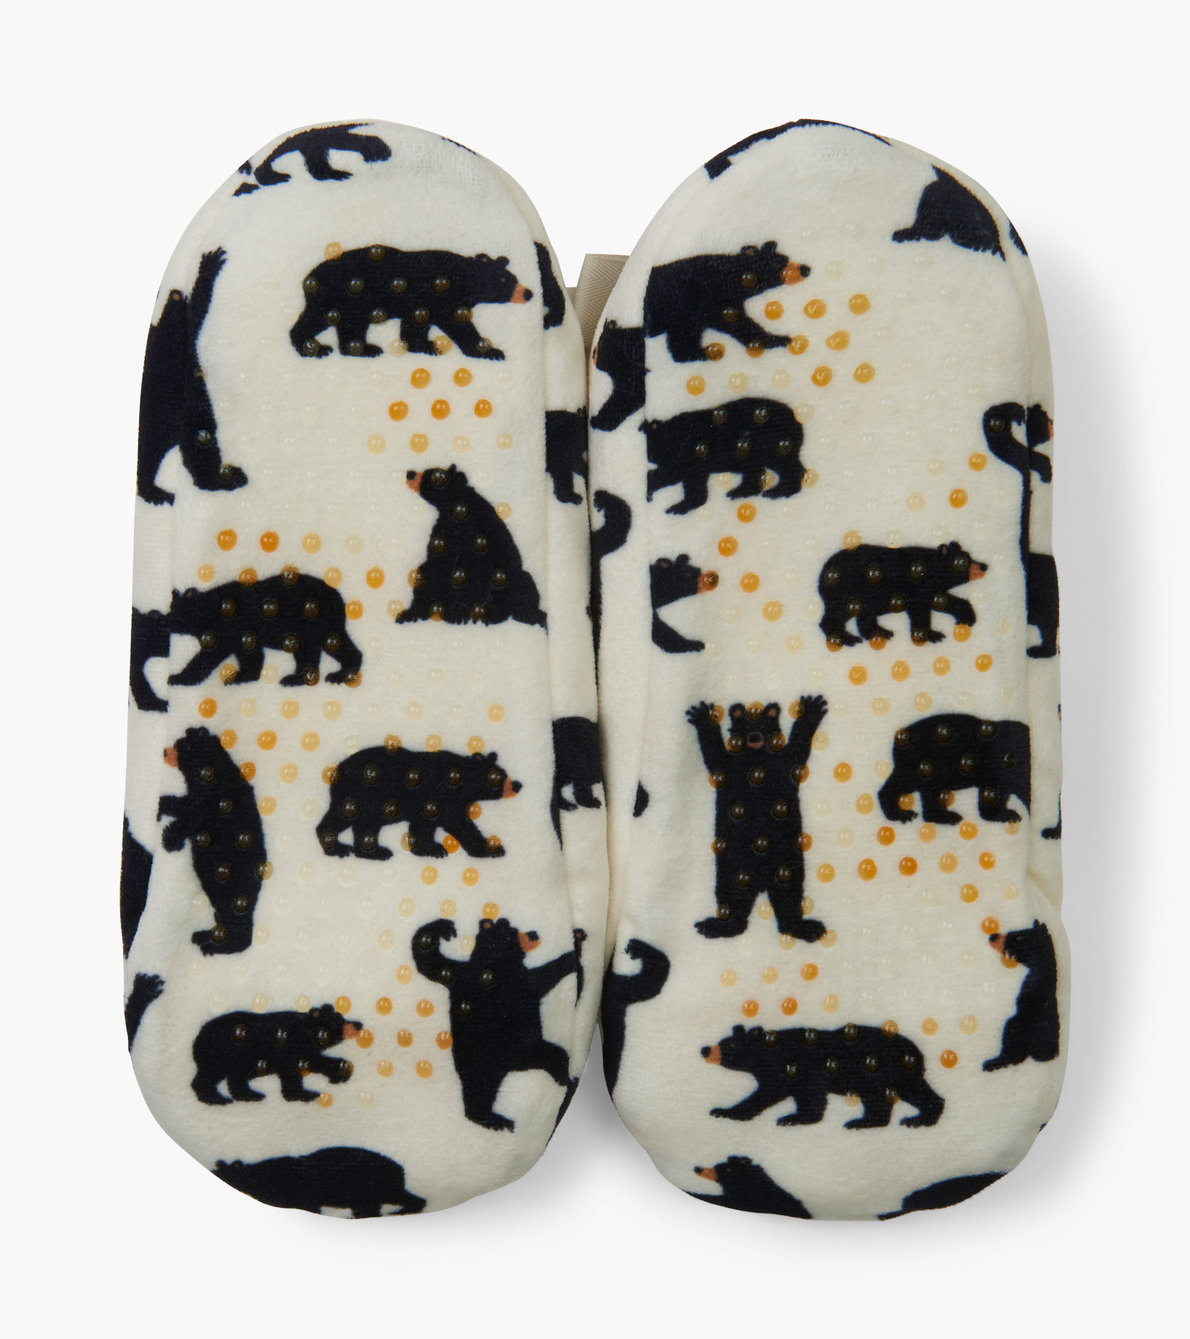 View larger image of Black Bears Women's Warm and Cozy Slippers